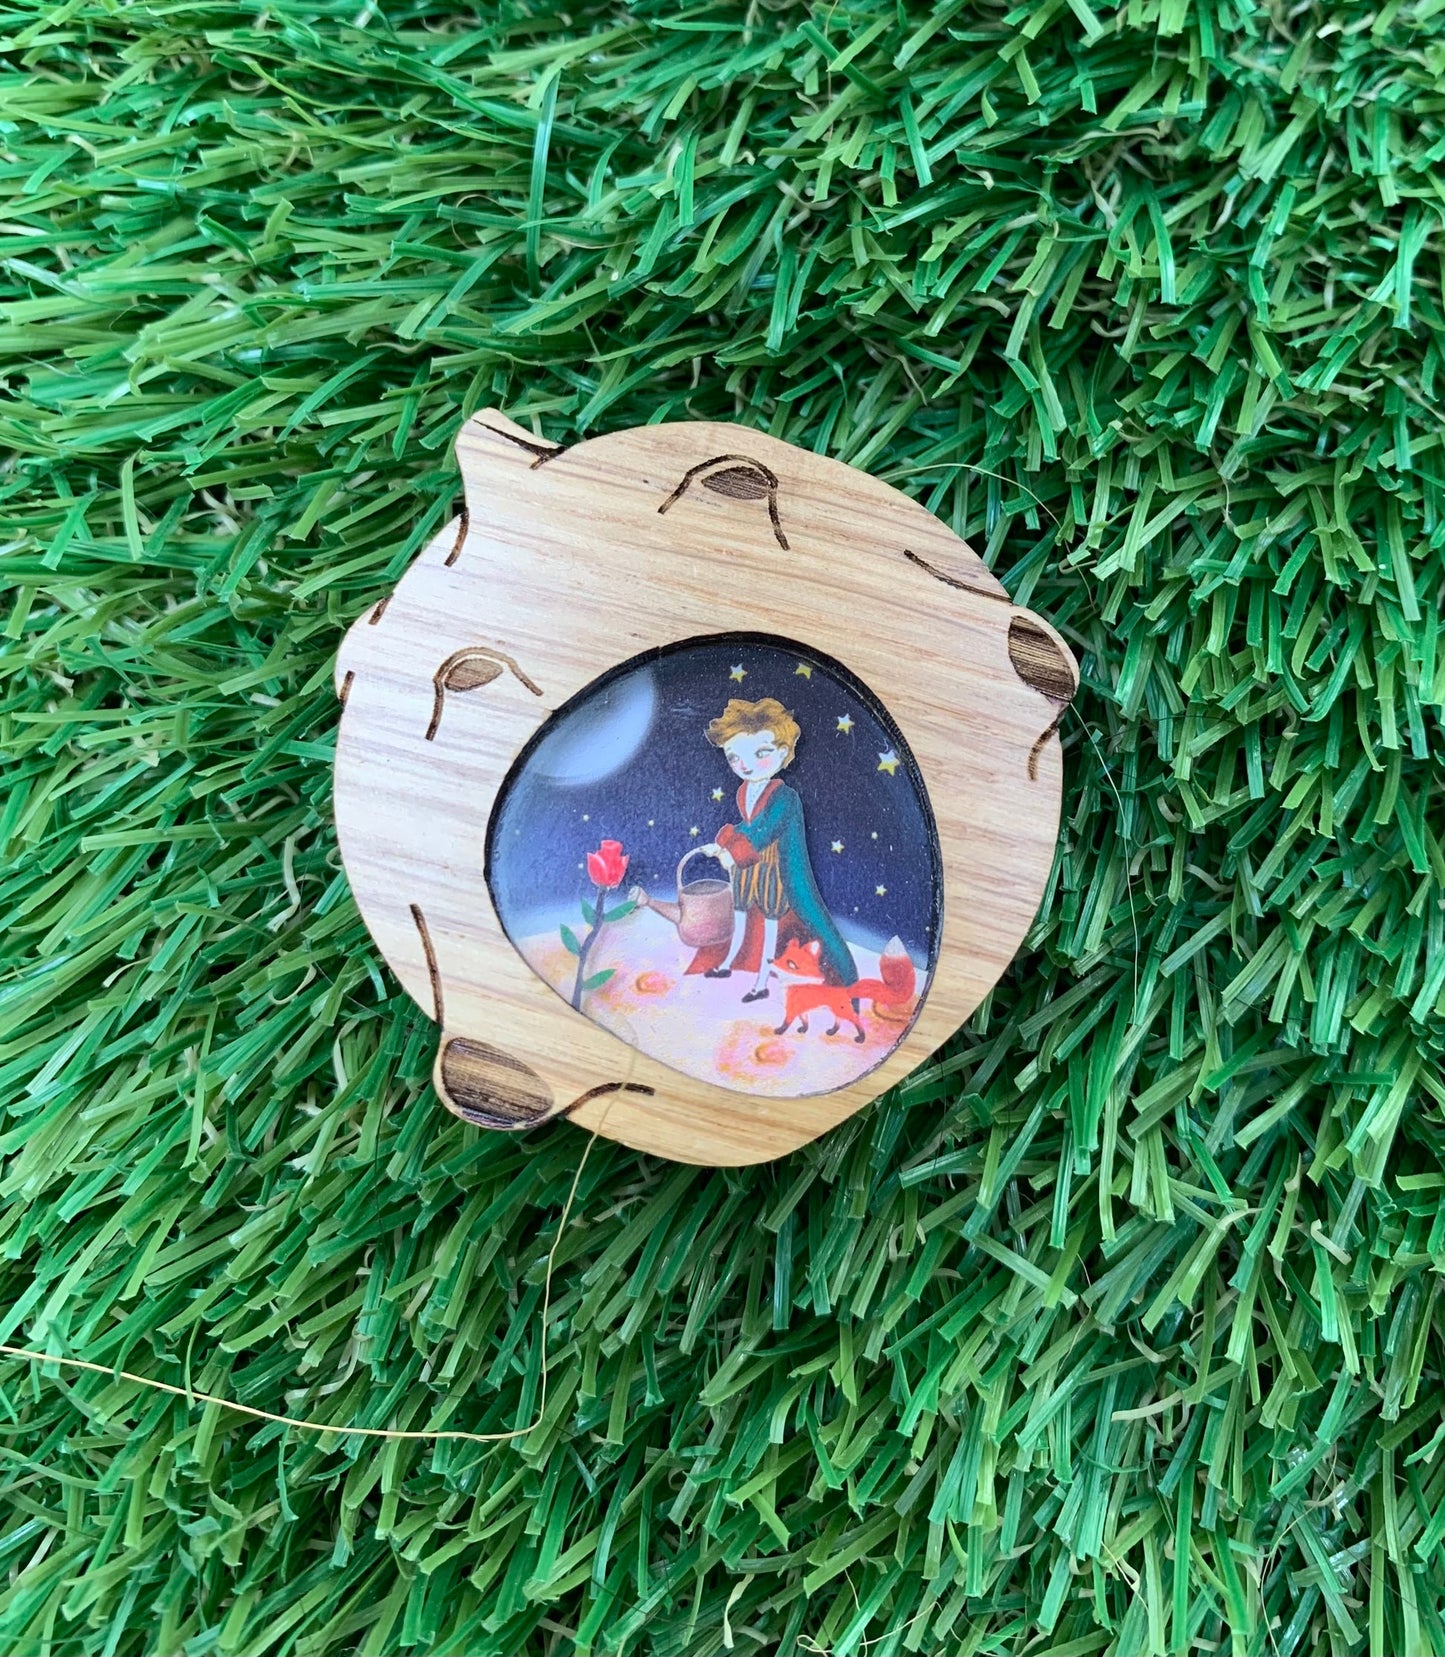 Little prince Brooch by Laliblue